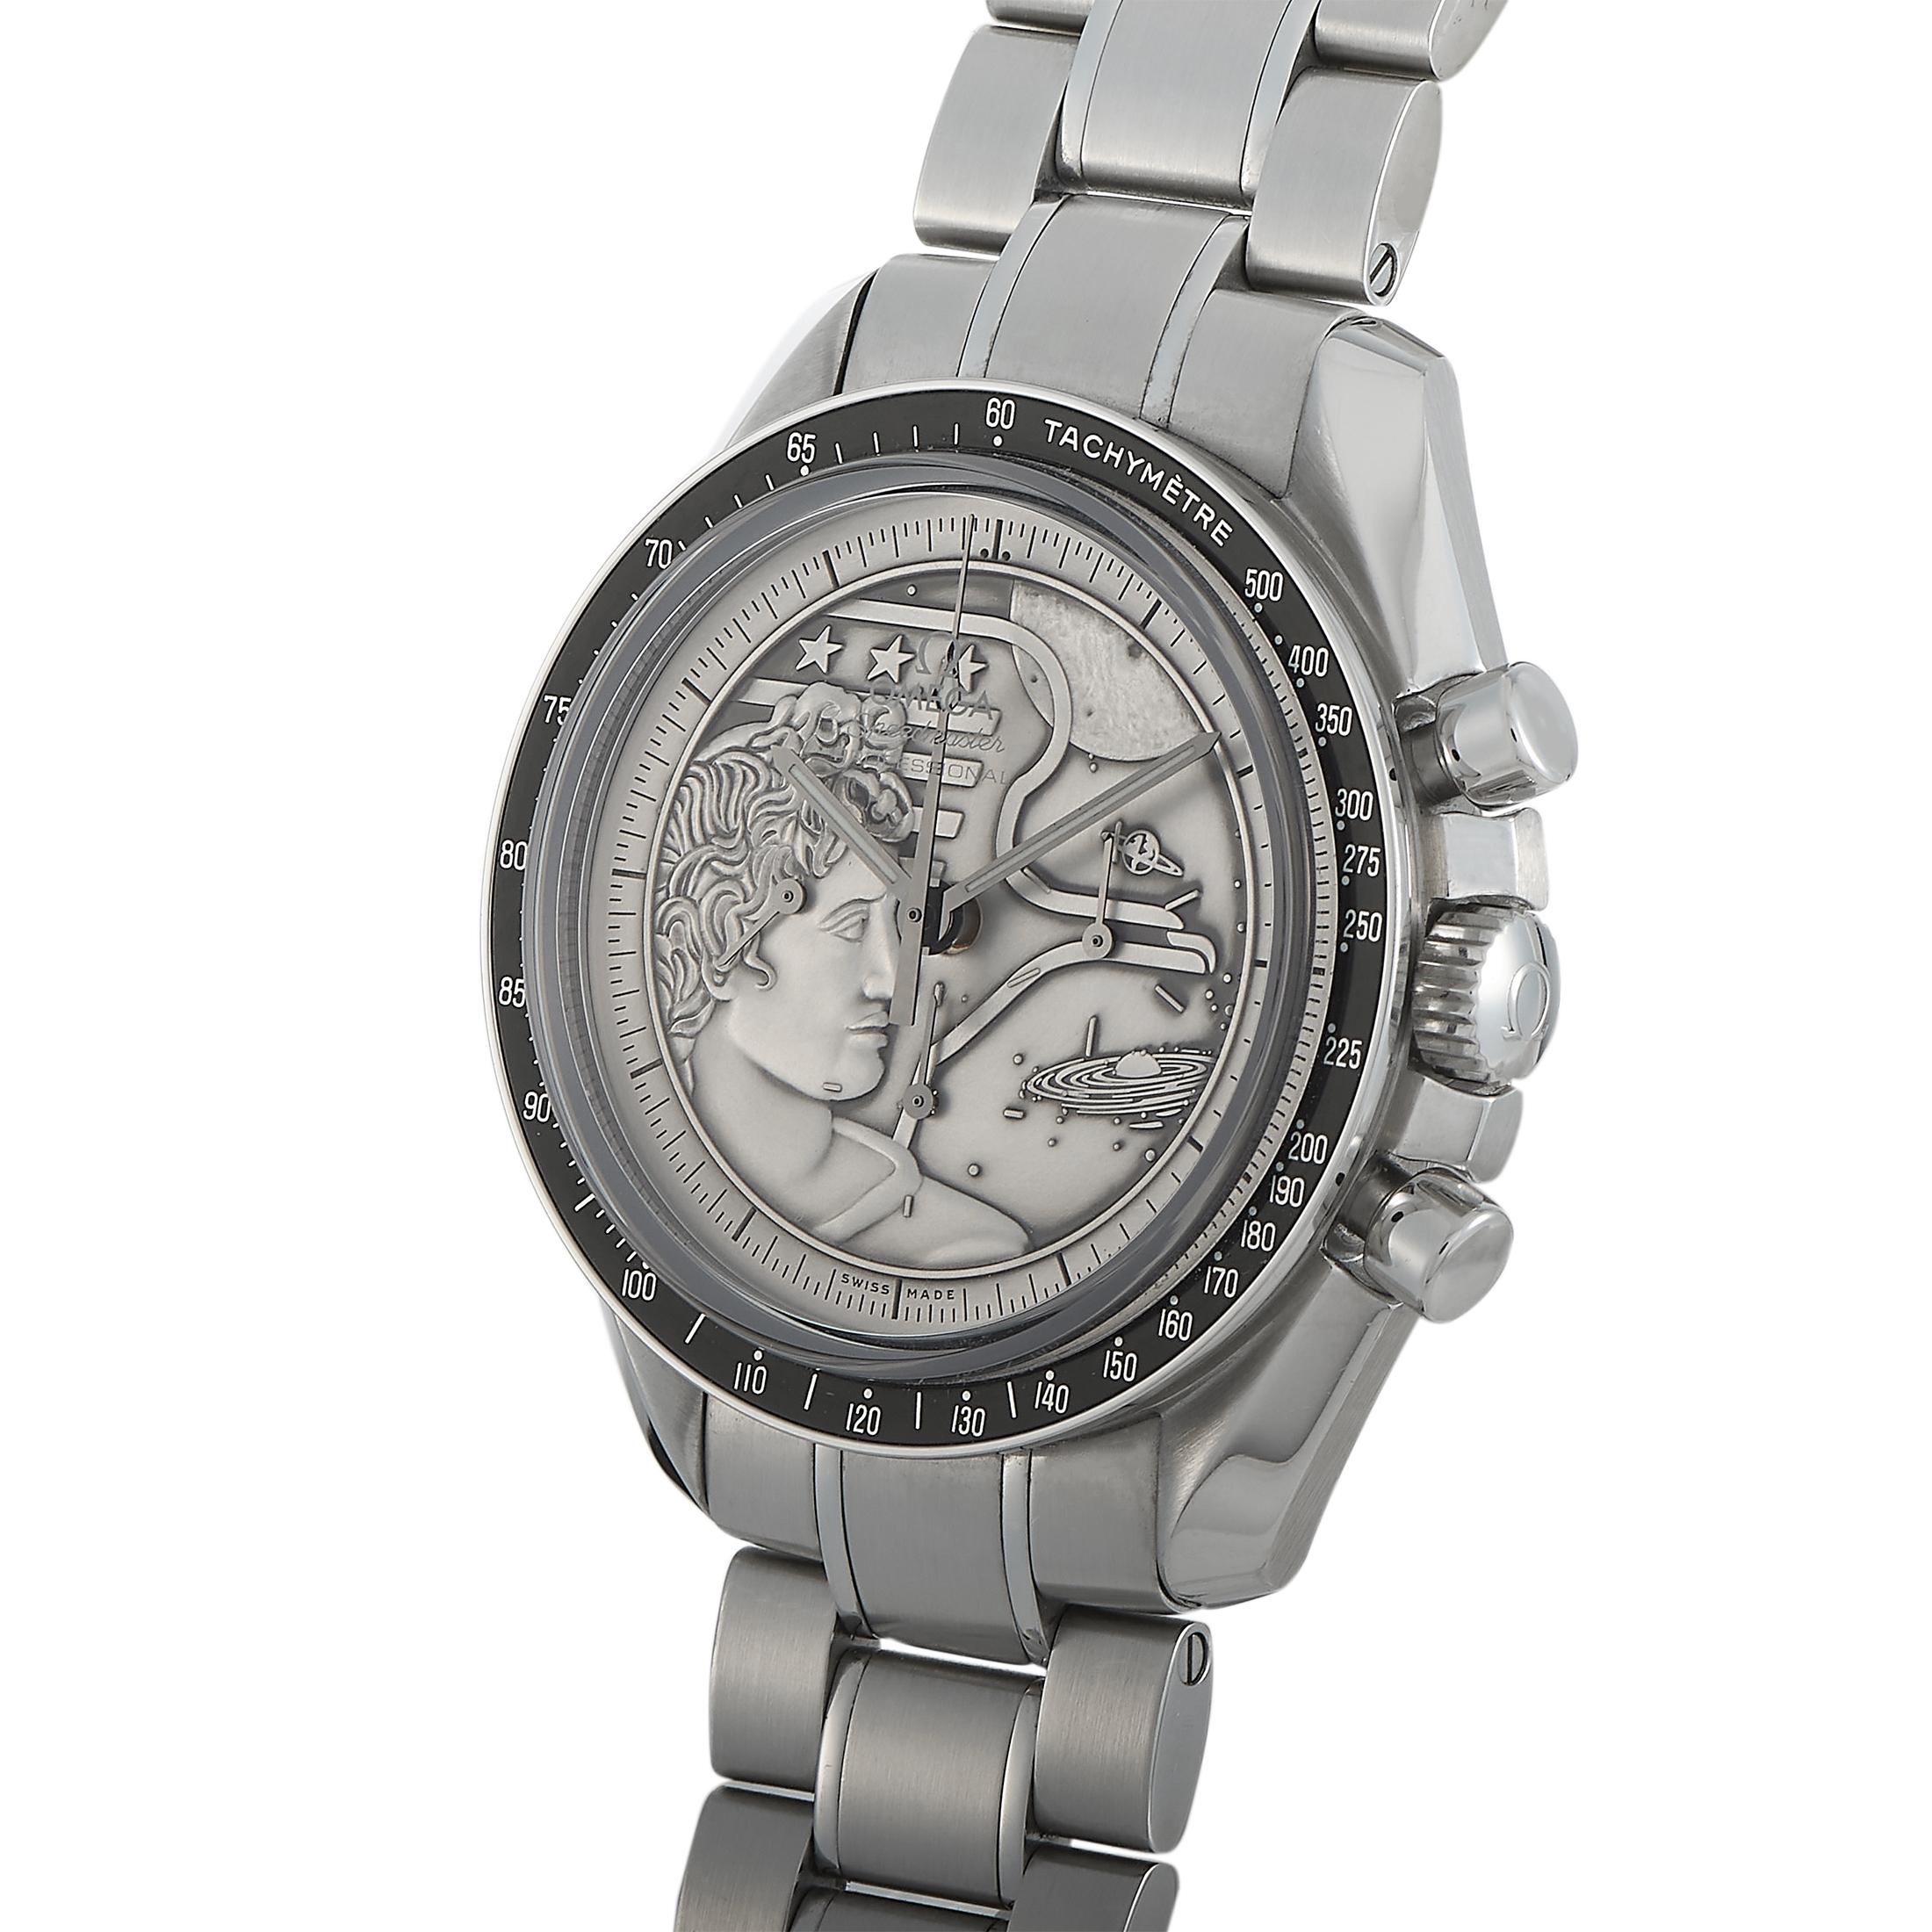 The Omega Speedmaster Moonwatch “Apollo XVII” 40th Anniversary, reference number 311.30.42.30.99.002, is presented within the superb “Speedmaster” collection in an edition limited to 1,972 pieces. It was created to commemorate the 40th anniversary